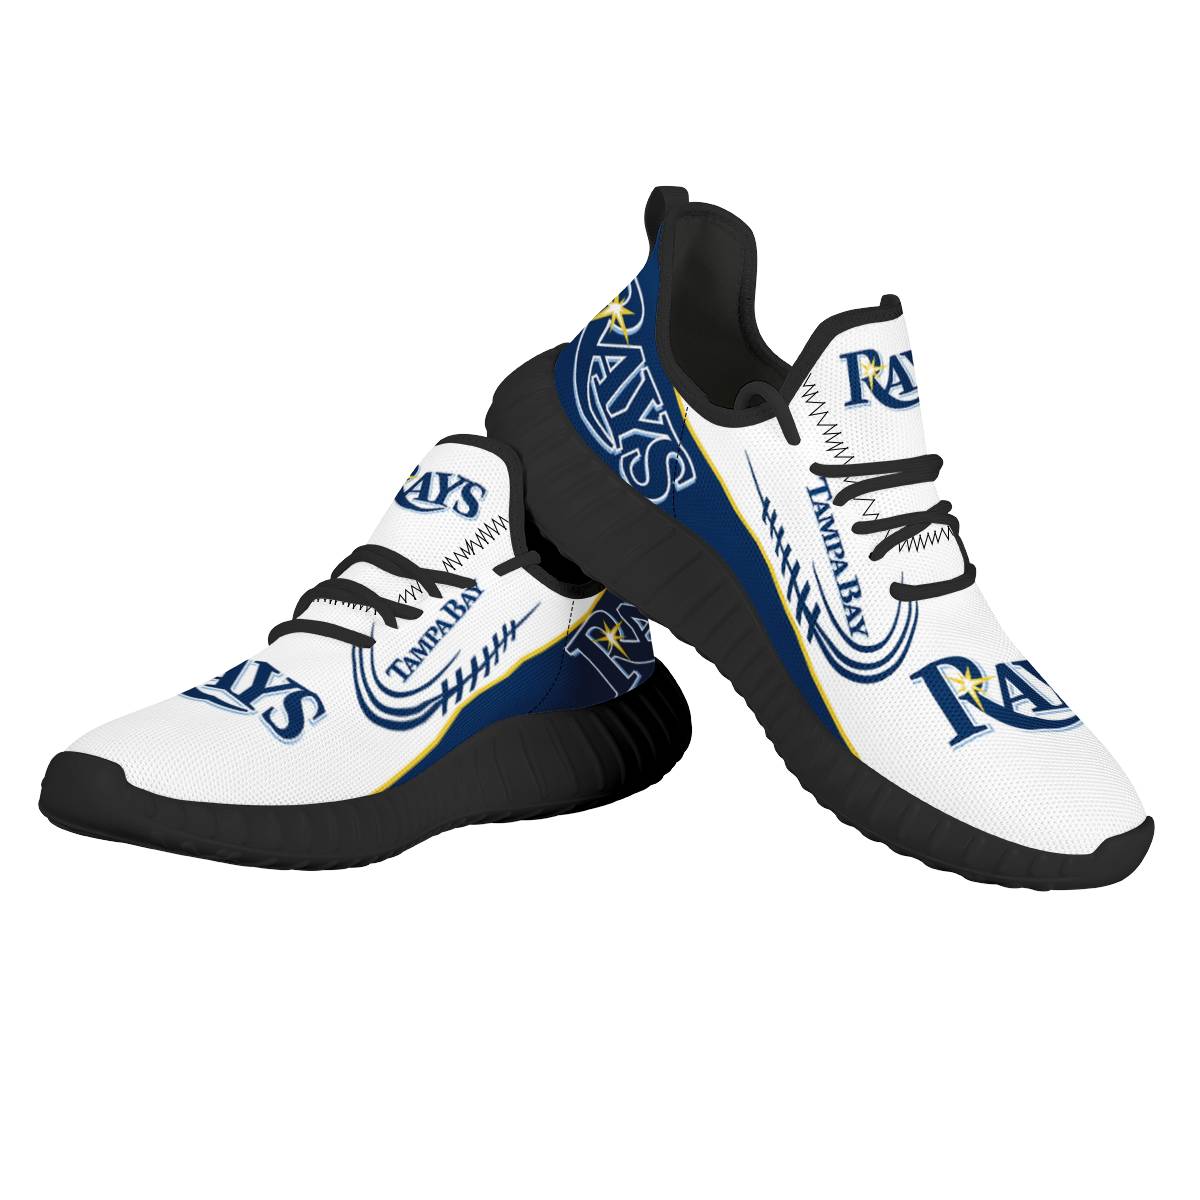 Women's Tampa Bay Rays Mesh Knit Sneakers/Shoes 005